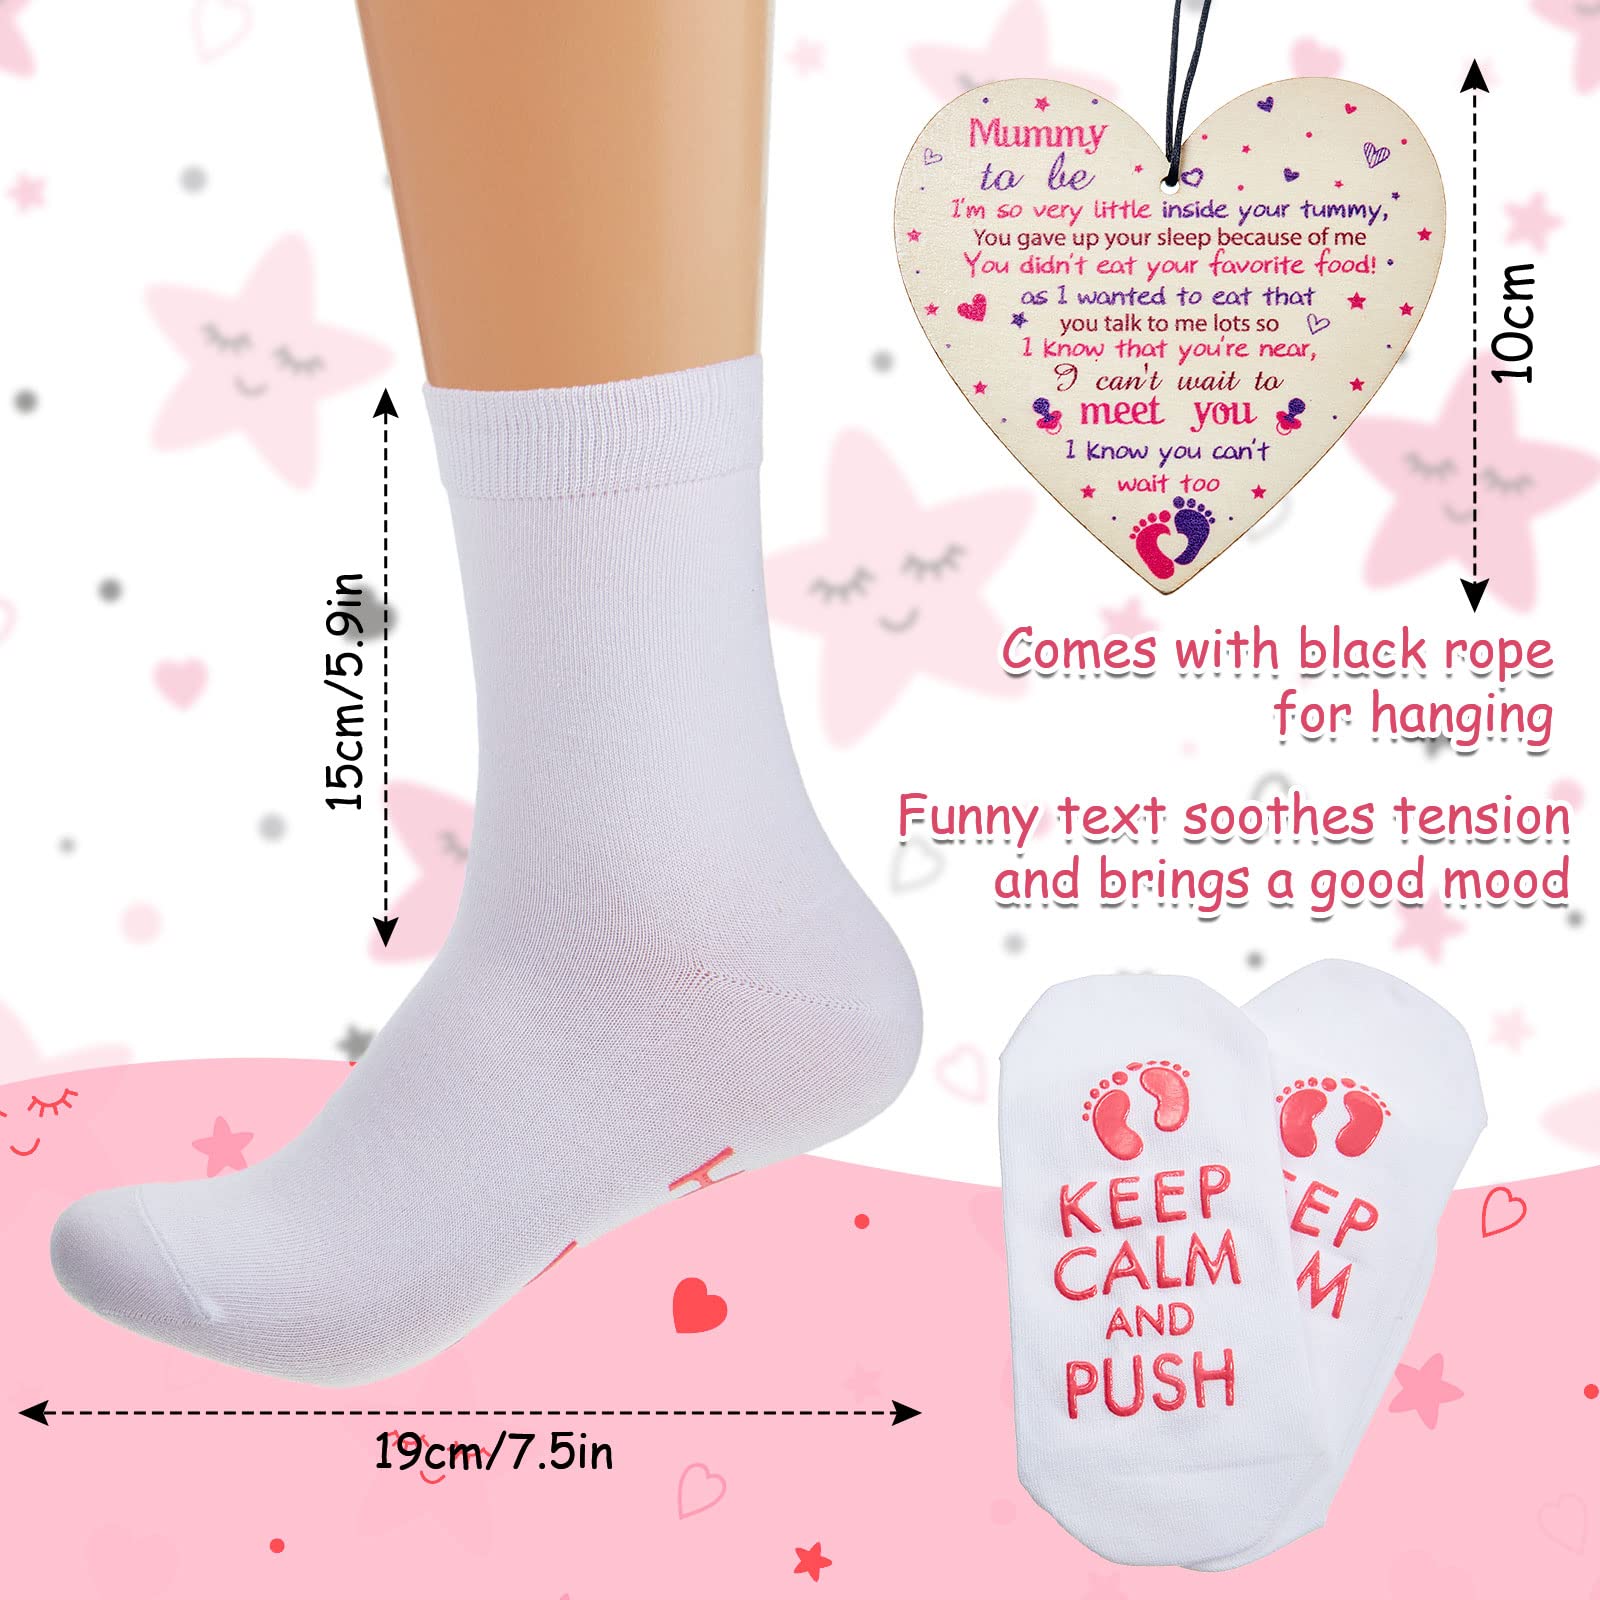 Keep Calm and Push Funny Maternity Socks Mummy to Be Sign Mother's Day Pregnancy Baby Shower Present Cotton Mummy Socks Mum to Be Gifts Wooden Heart Keepsake with Rope for Pregnancy Women (Pink)